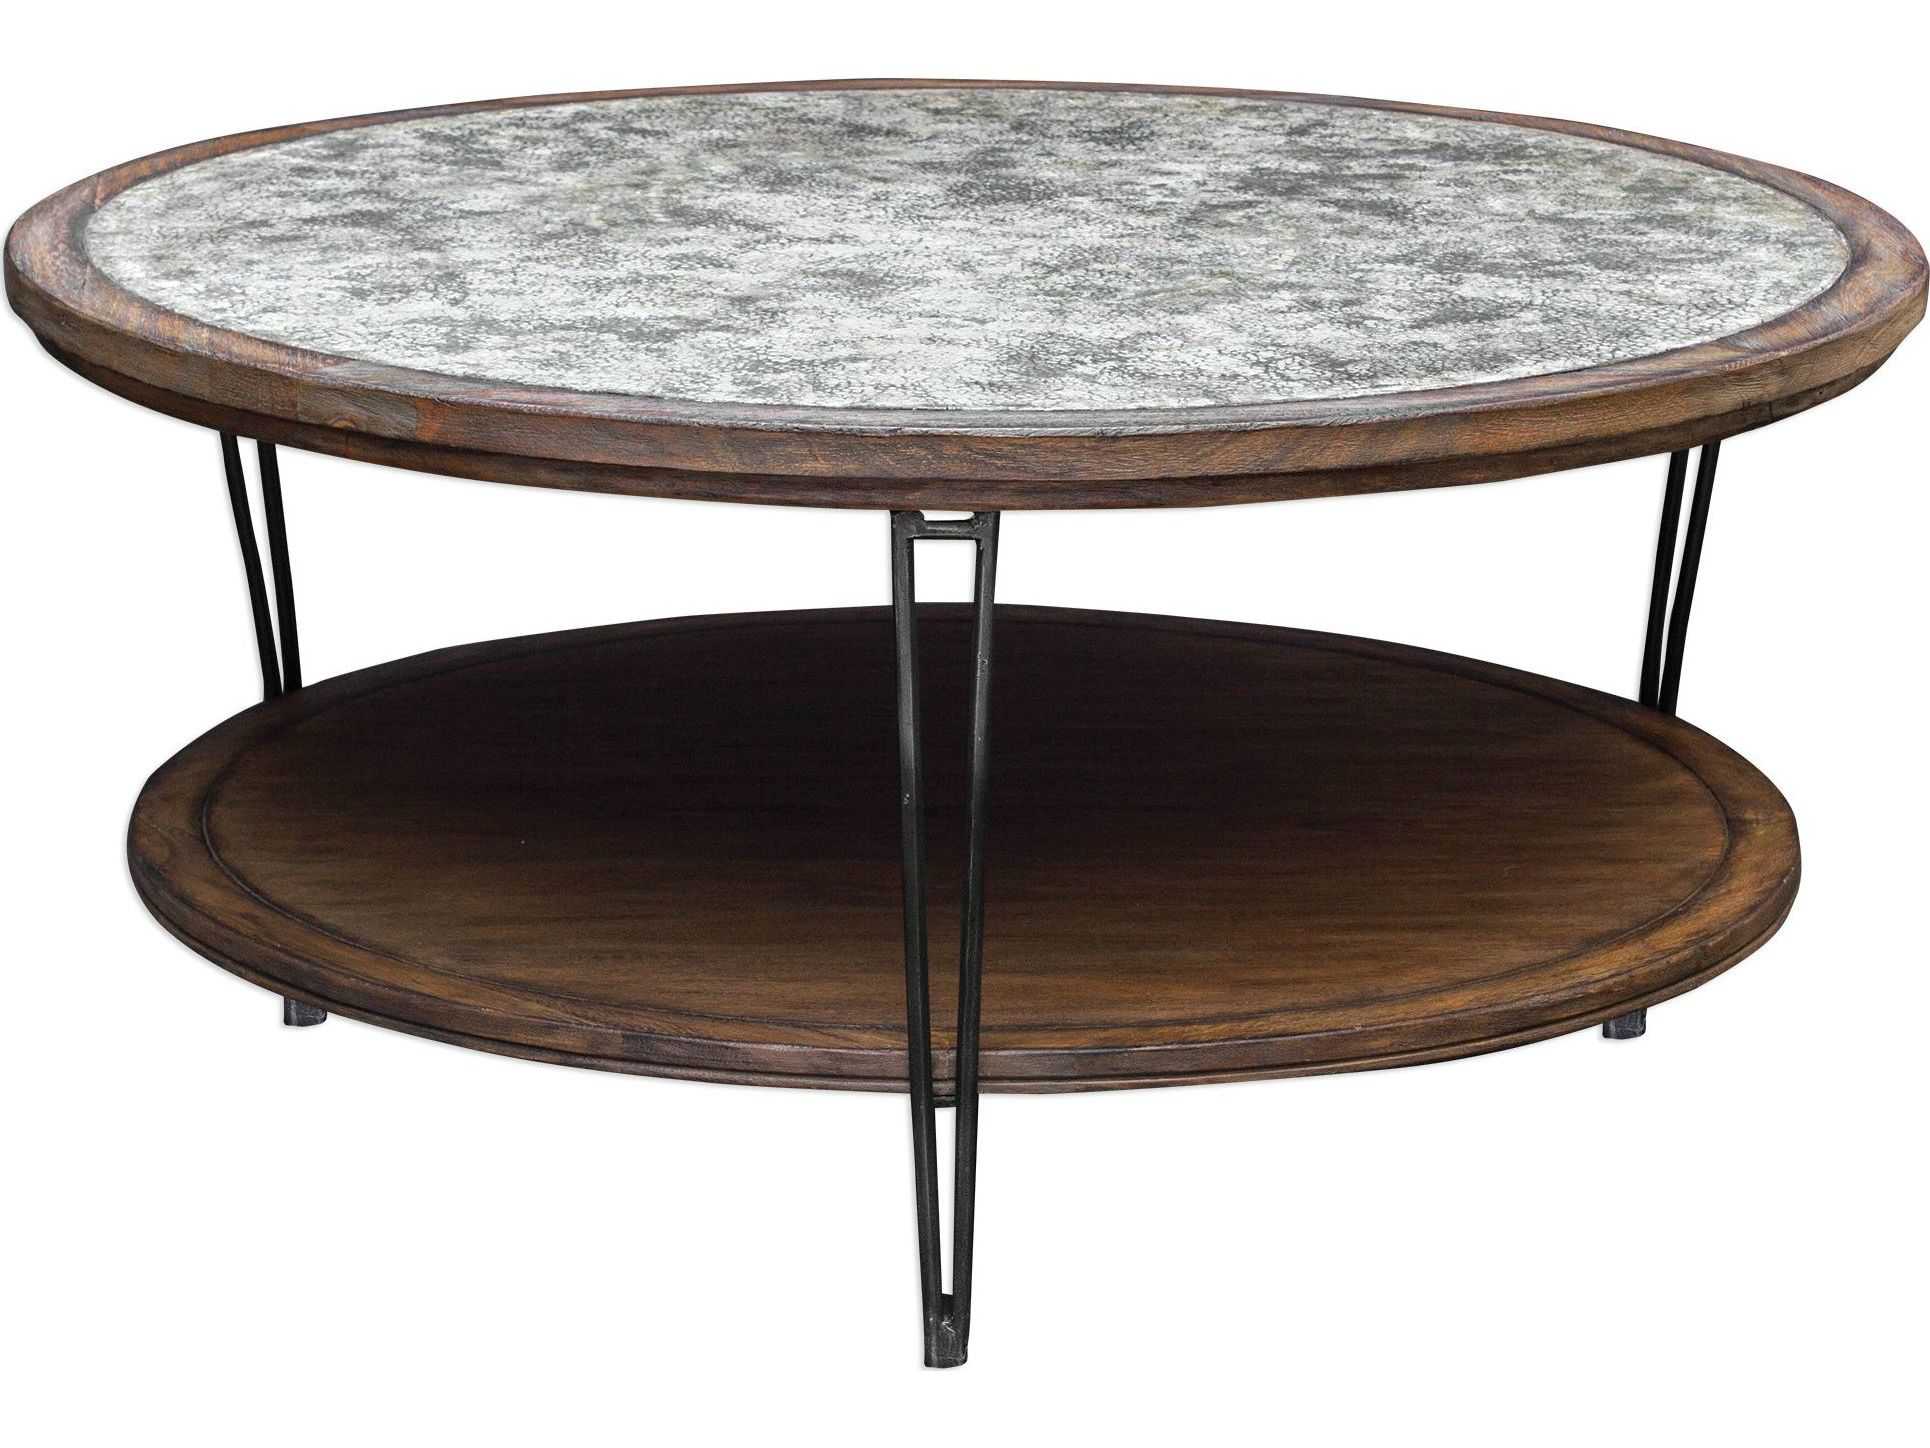 Carelton Industrial Modern Rustic Charcoal Oak Black Base Round Round Coffee Table 41 W 50 W Kathy Kuo Home